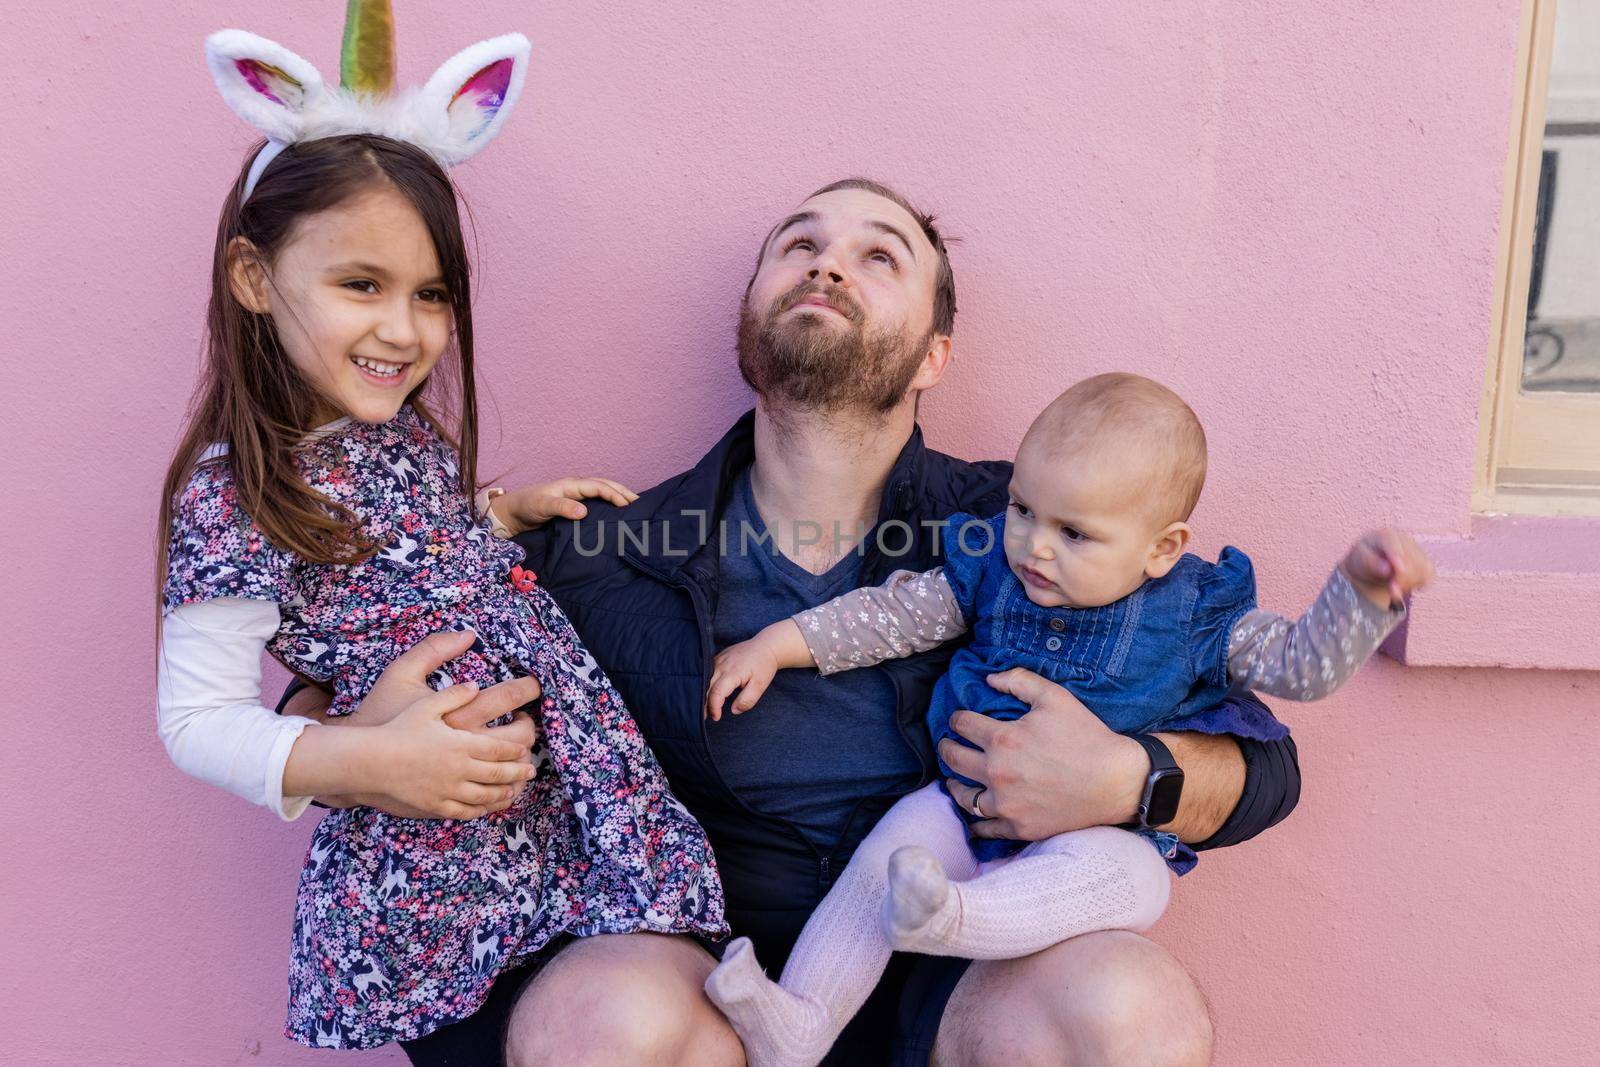 Portrait of young father looking up and hugging his adorable baby and older daughter in front of a pink wall. Bearded man in squatting position holding baby and little girl. Happy family outdoors